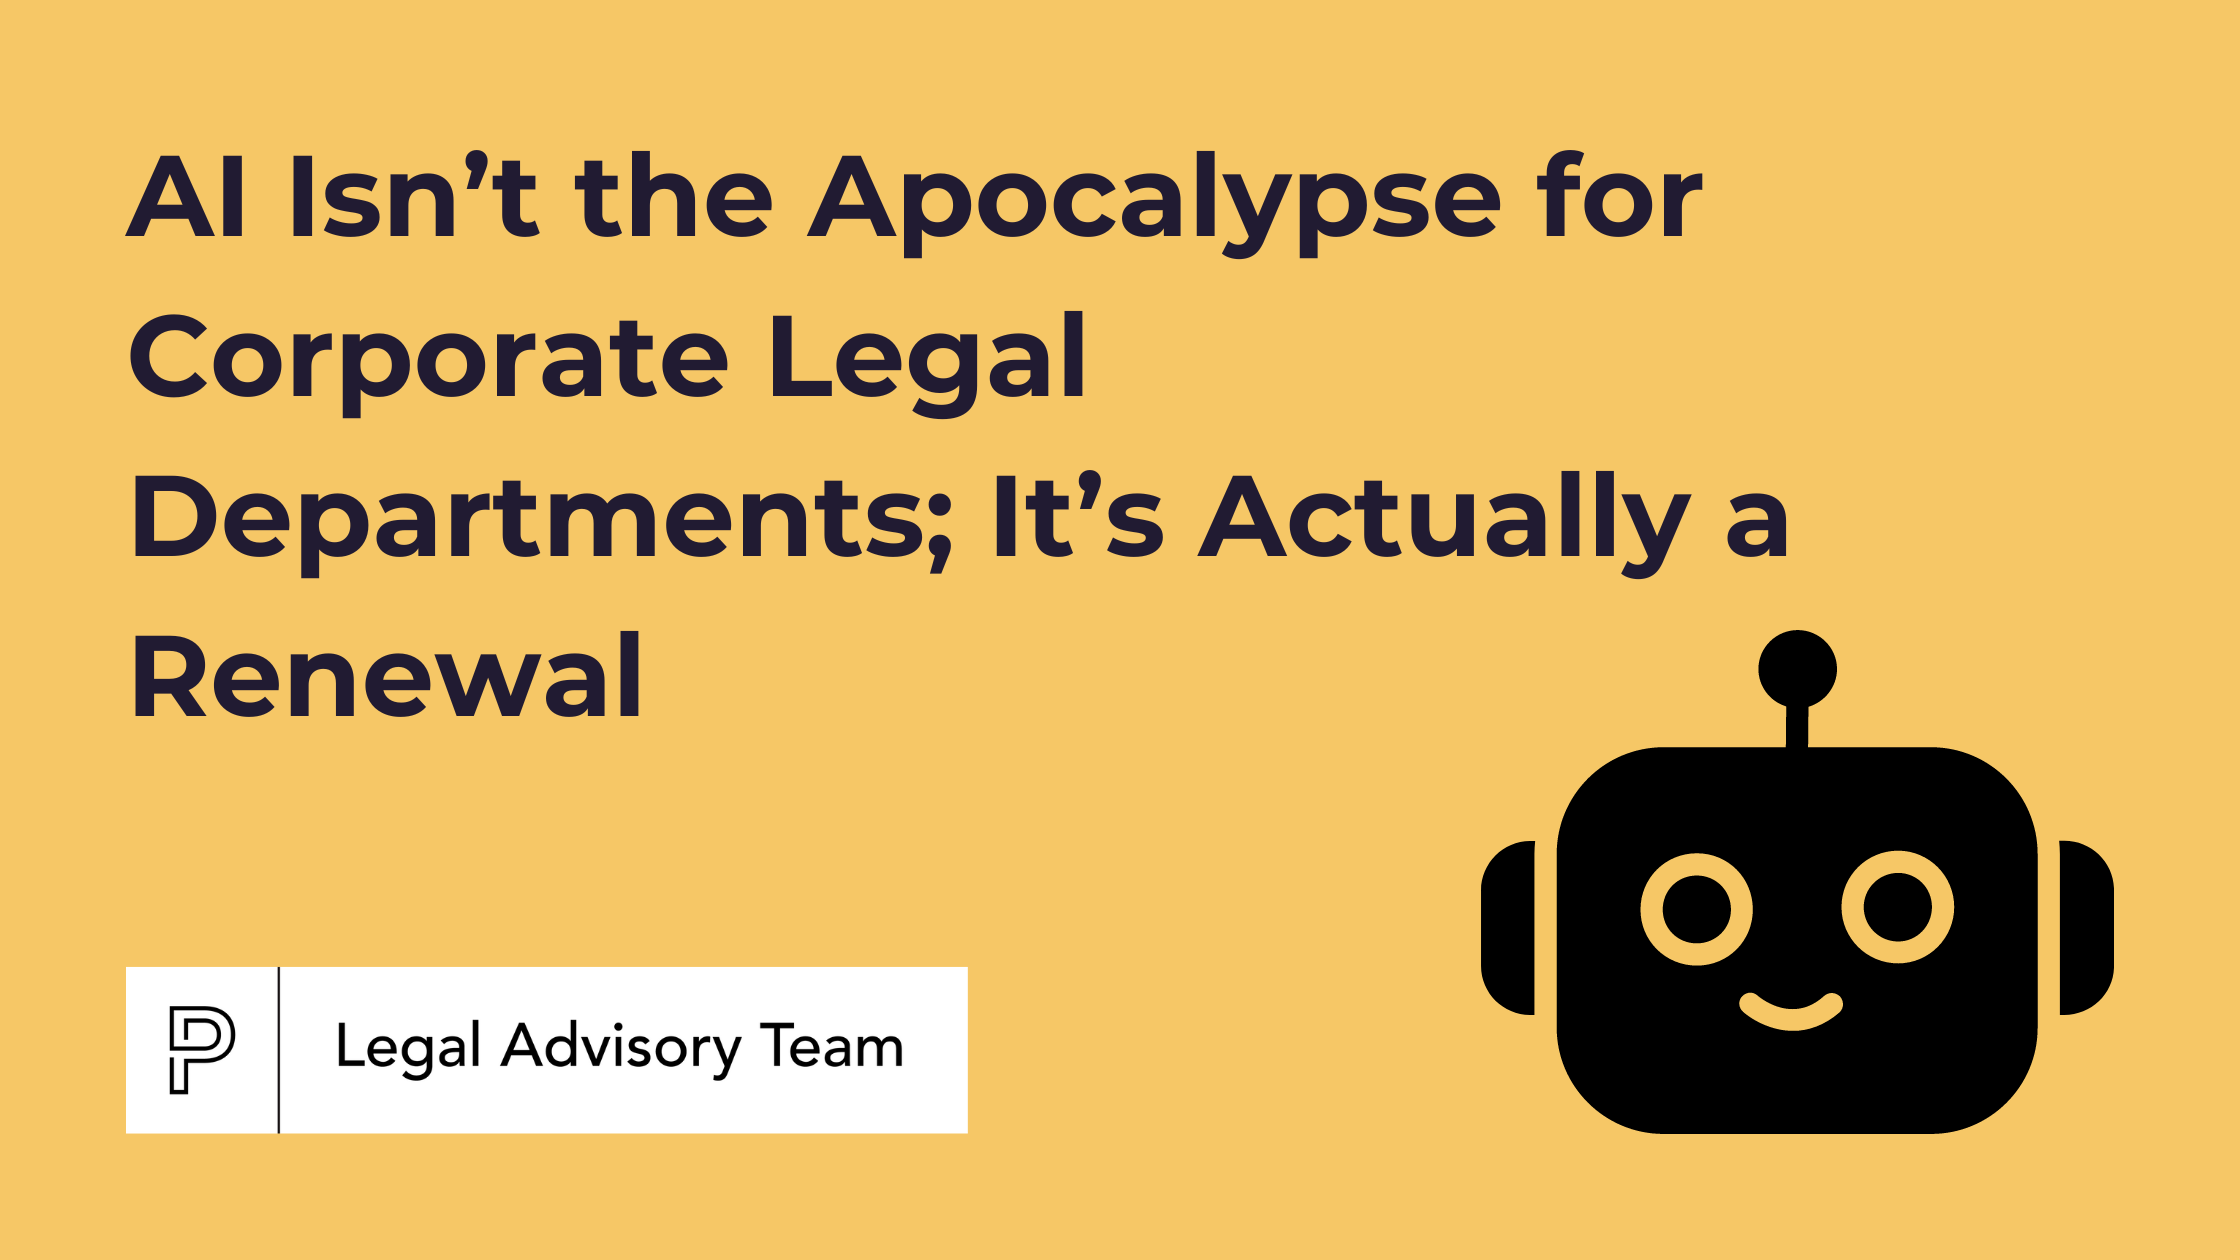 AI Isn’t the Apocalypse for Corporate Legal Departments; It’s Actually a Renewal